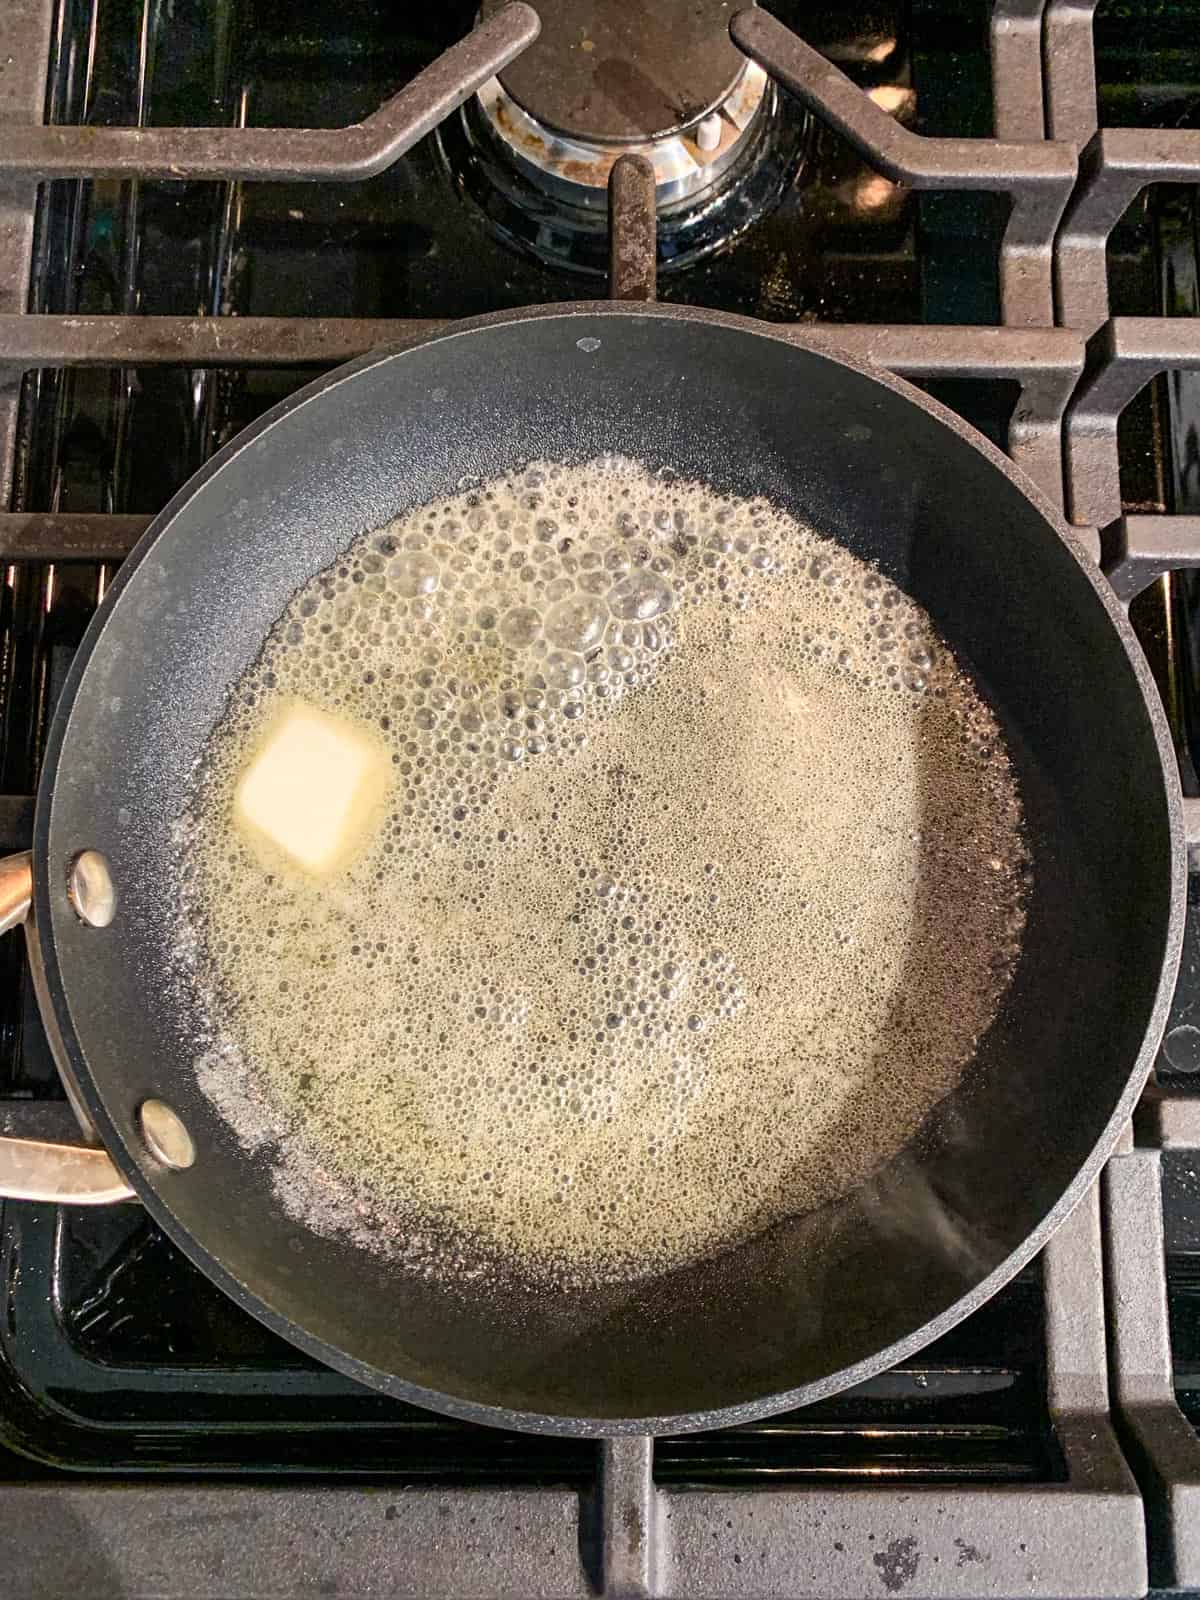 Melted butter in a skillet.